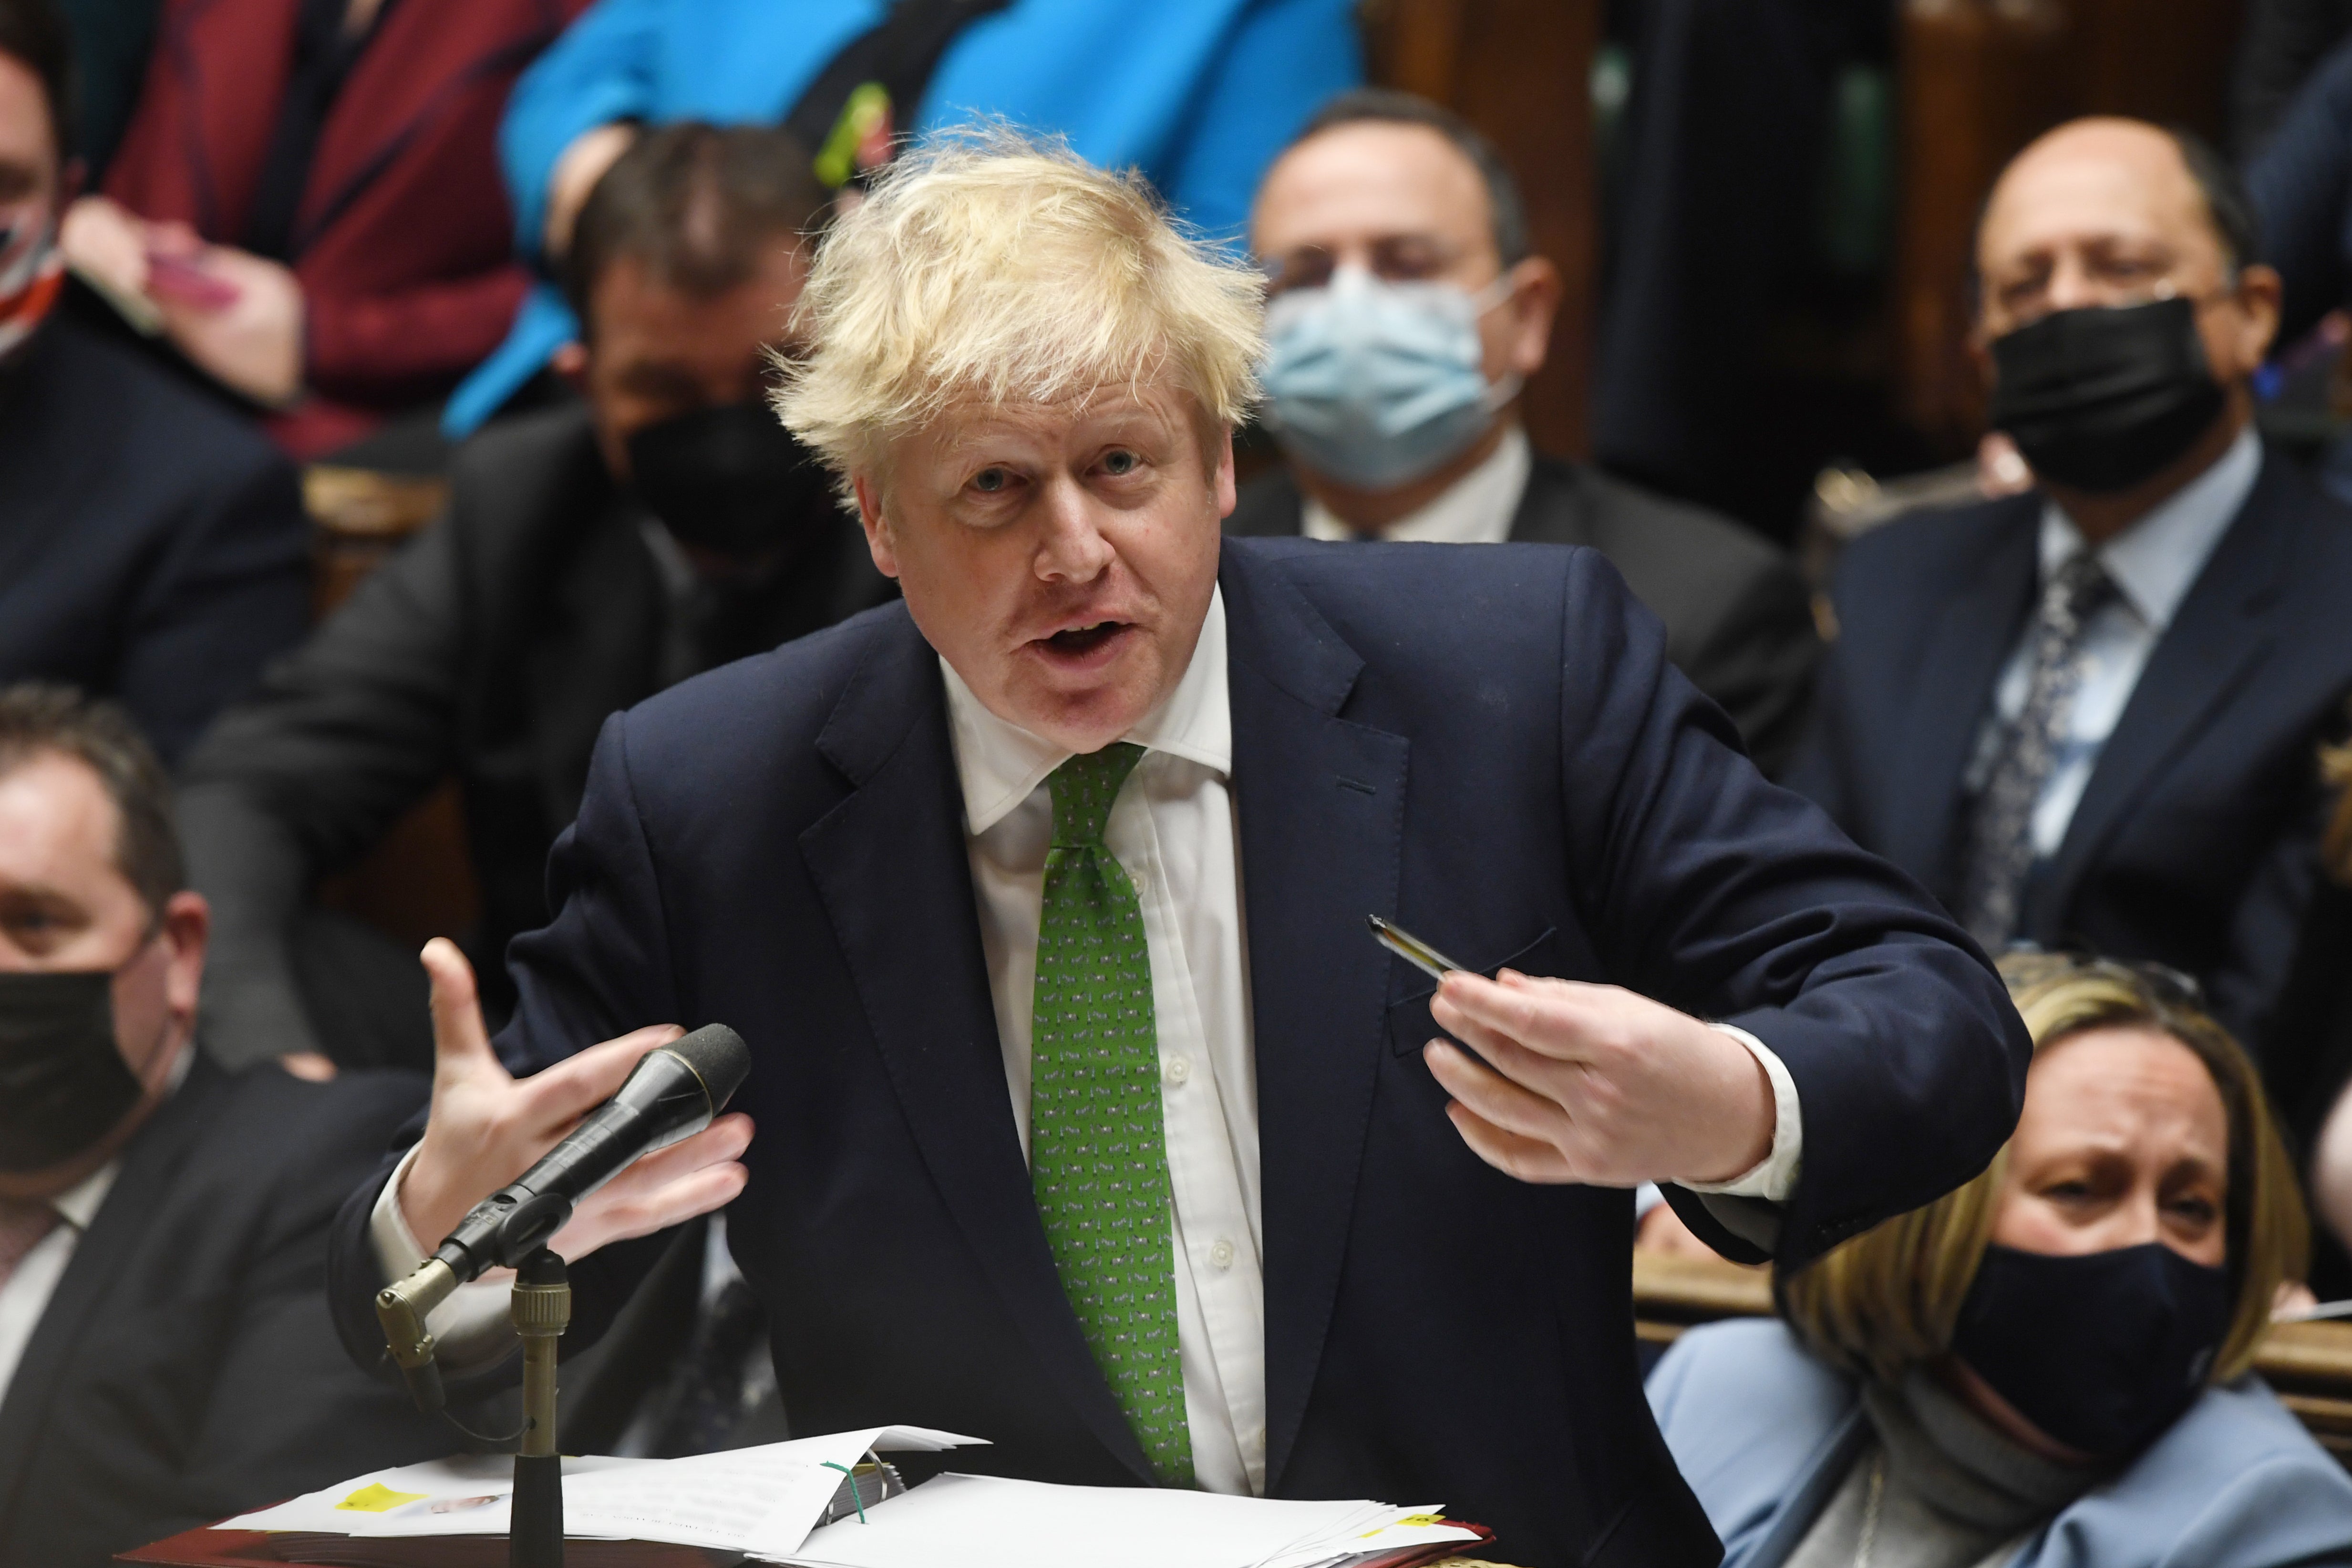 Perhaps Johnson will one day end up as a lively leader of the Conservative opposition